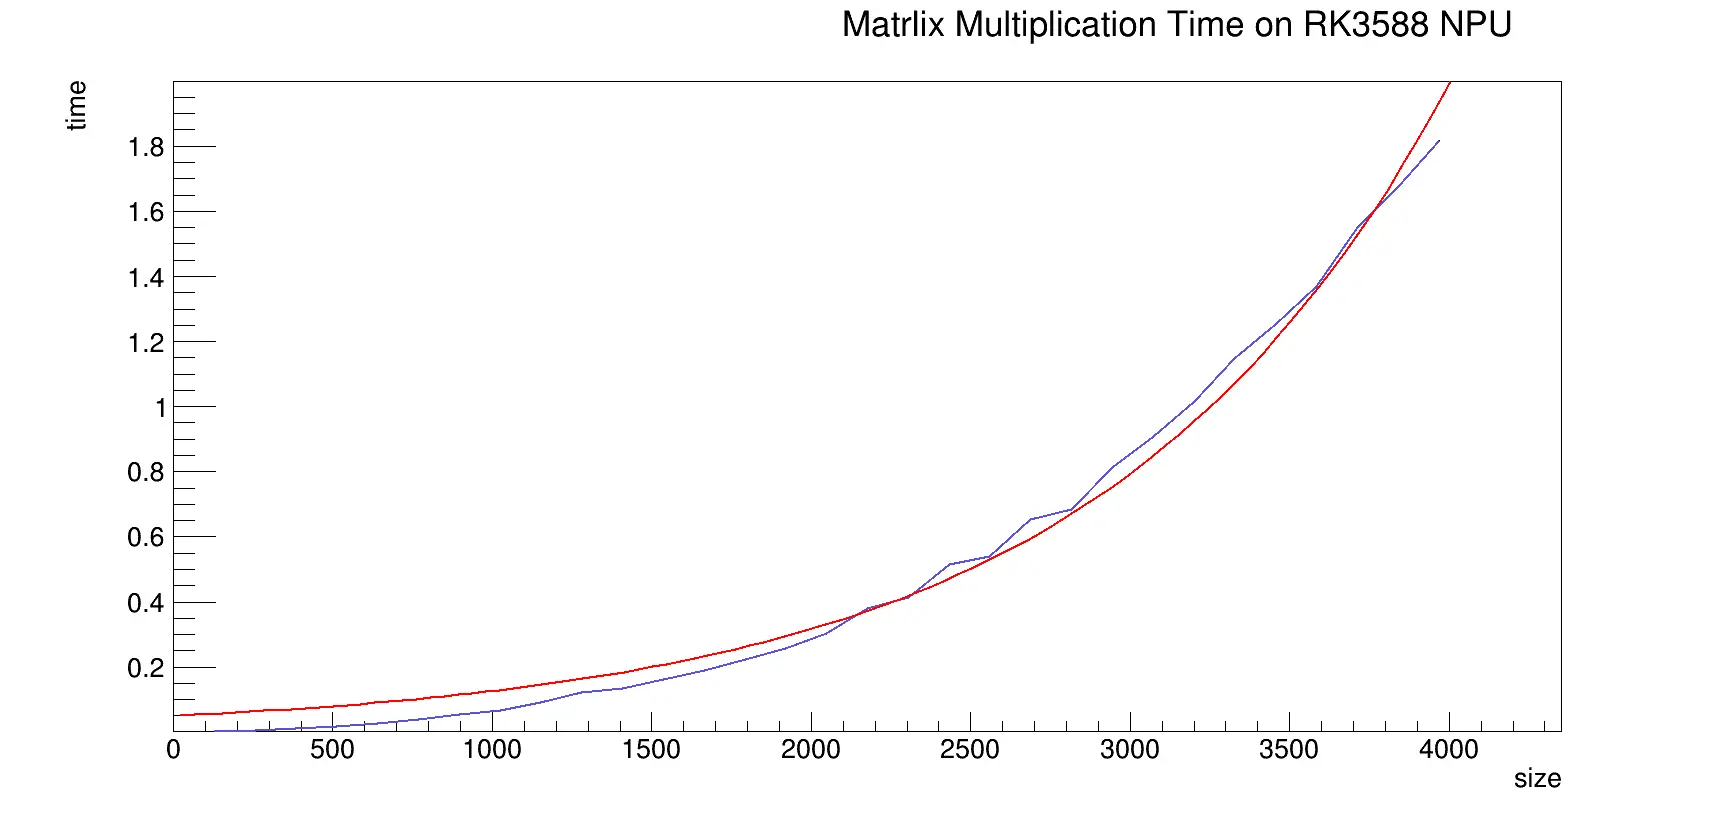 Line graph showing the time it takes to run matrix multiplication on the NPU